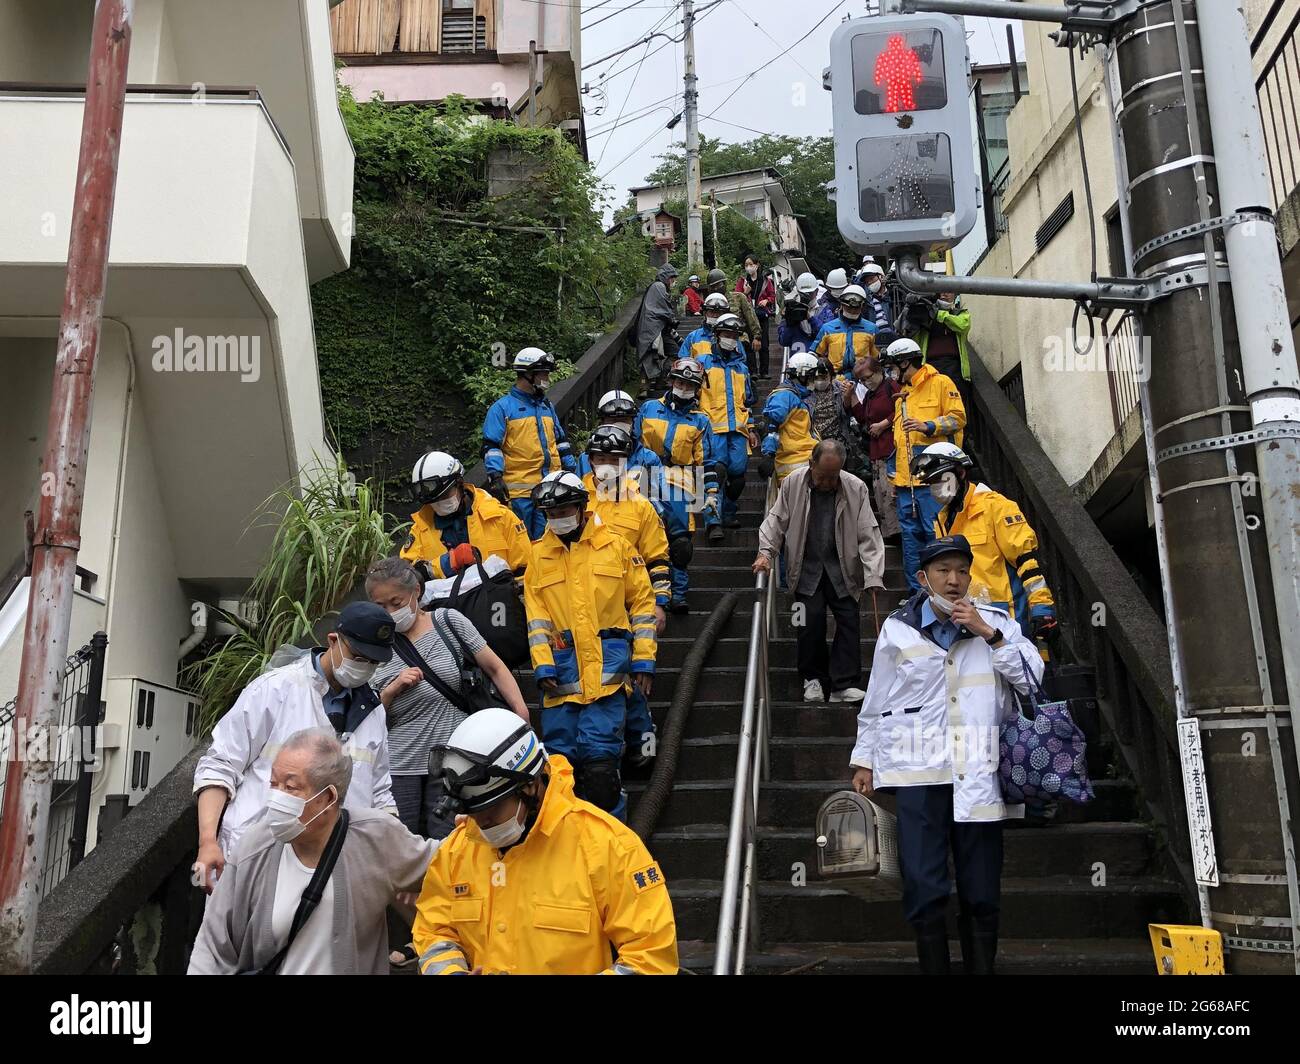 Shizuoka, Japan. 4th July, 2021. Rescuers help to transfer local citizens after a mudslide in Atami, Shizuoka prefecture, Japan, July 4, 2021. Two people were dead and about 20 others remained missing on Saturday following a massive mudslide triggered by torrential rain in central Japan, local authorities said. Credit: Hua Yi/Xinhua/Alamy Live News Stock Photo